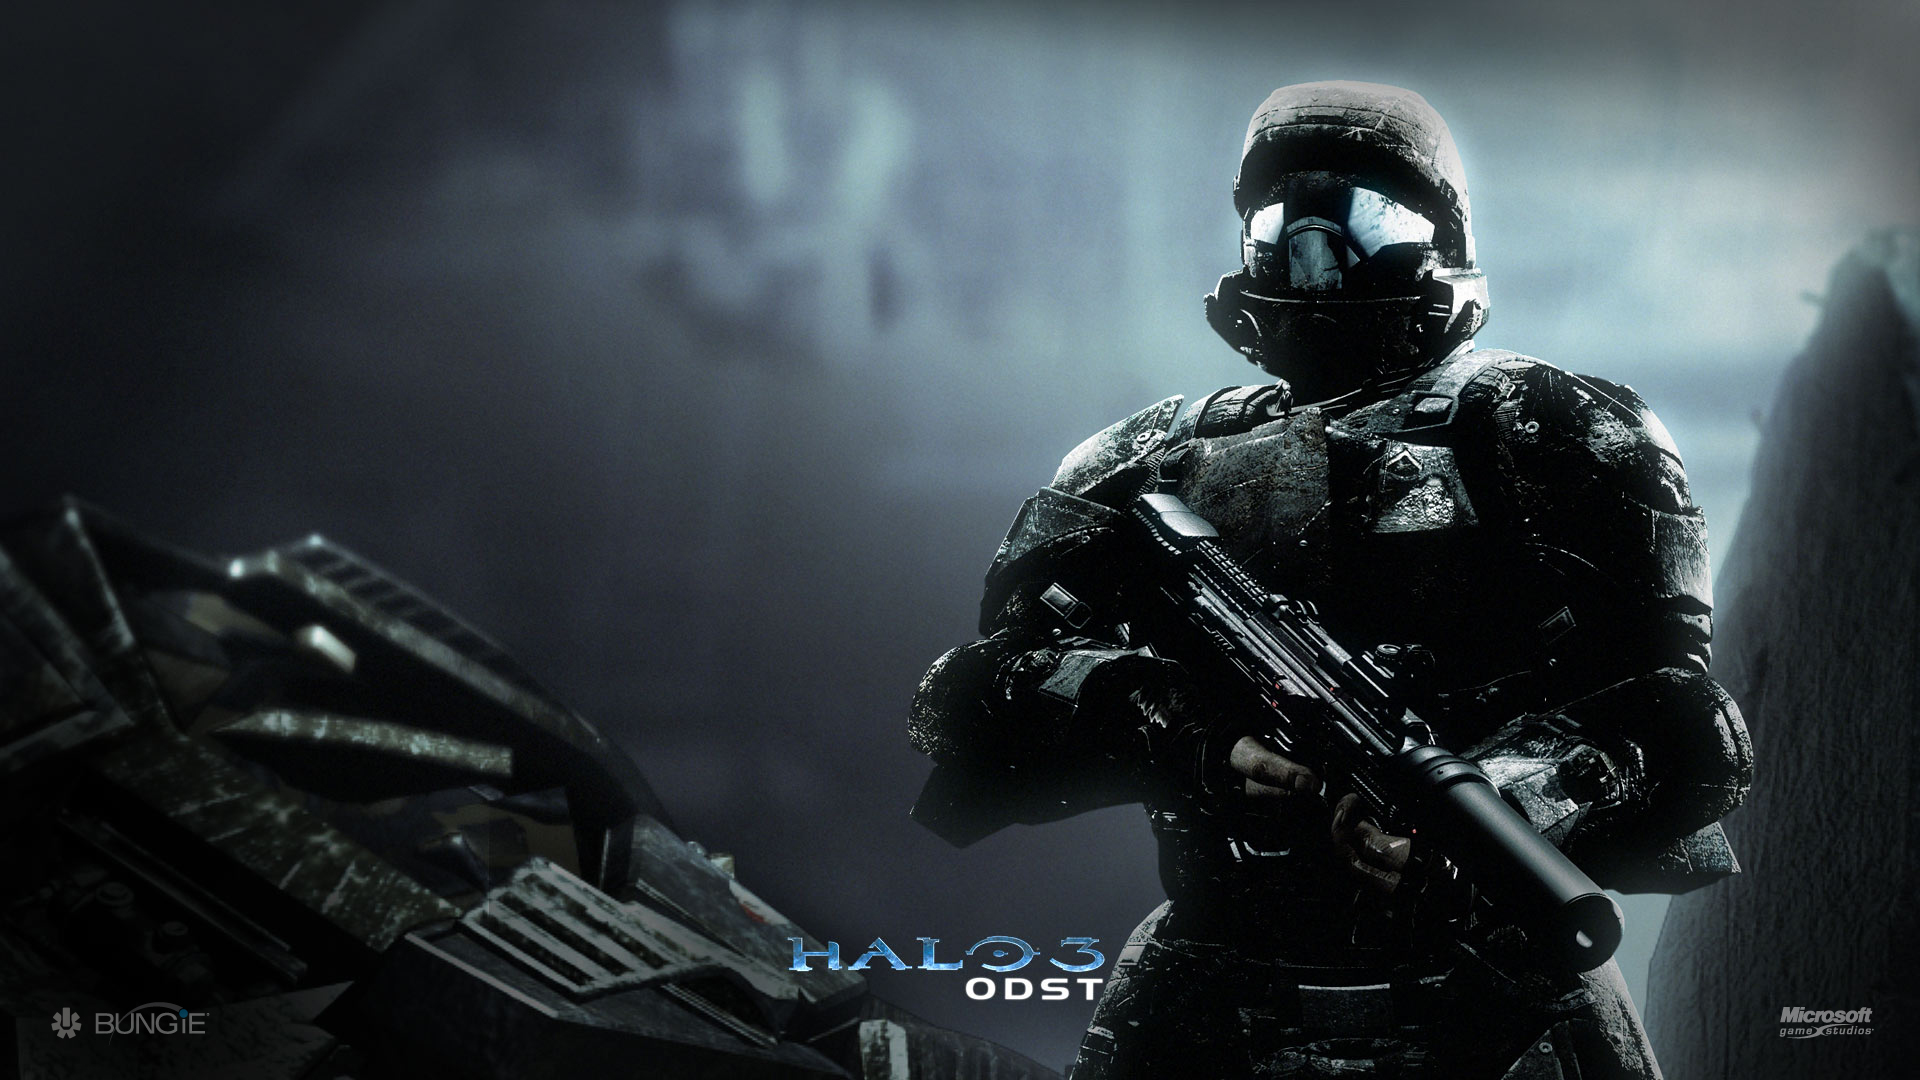 Wele To The Halo Odst Wallpaper